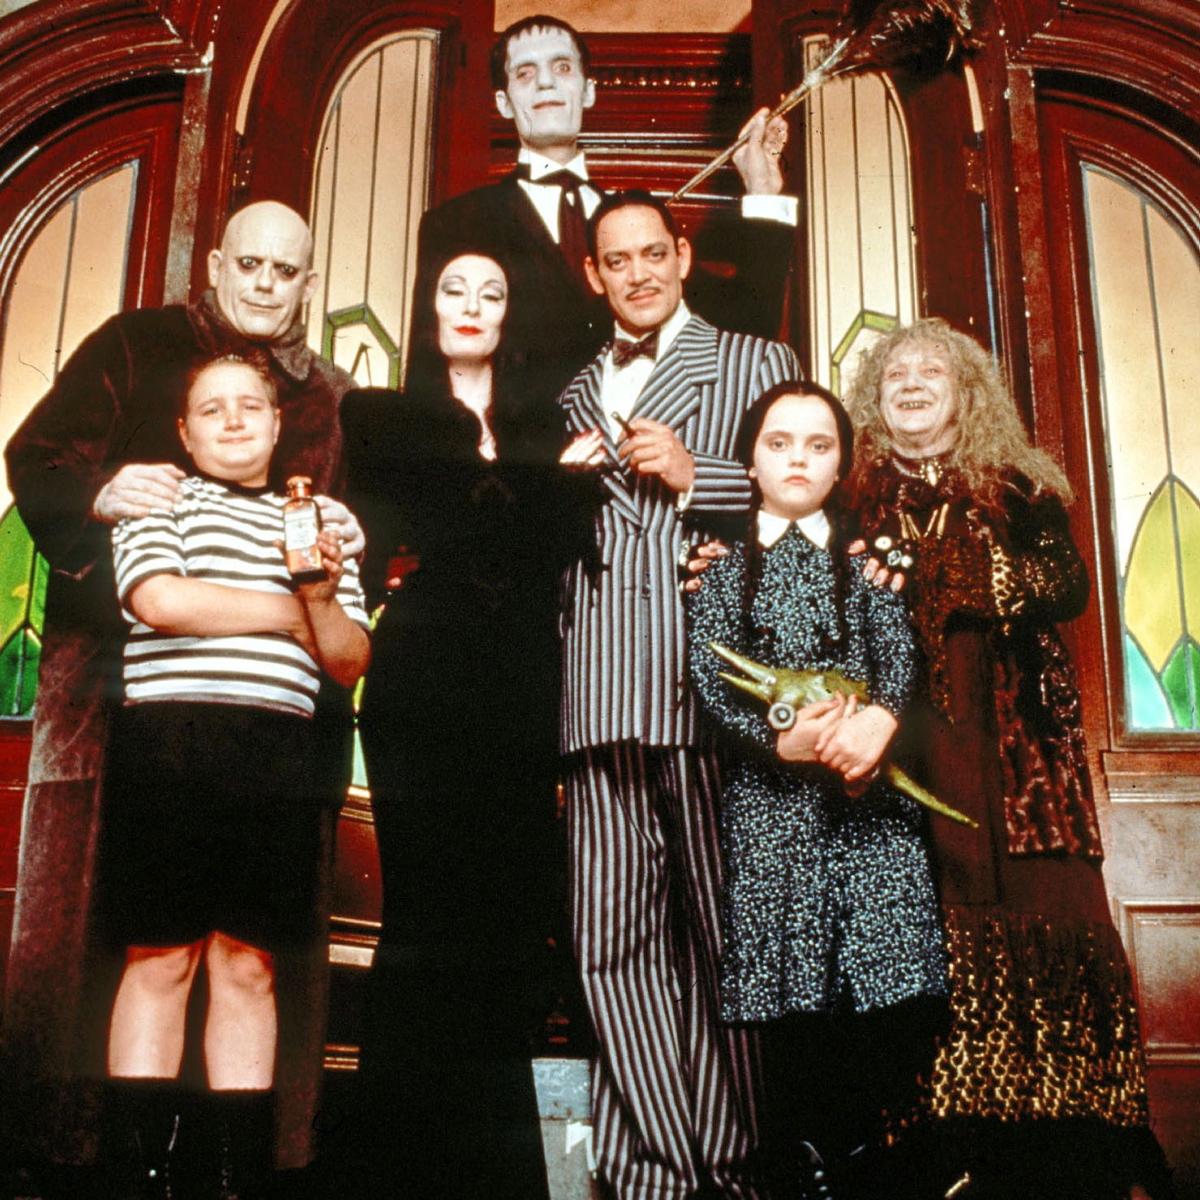 HQ The Addams Family Wallpapers | File 224.95Kb